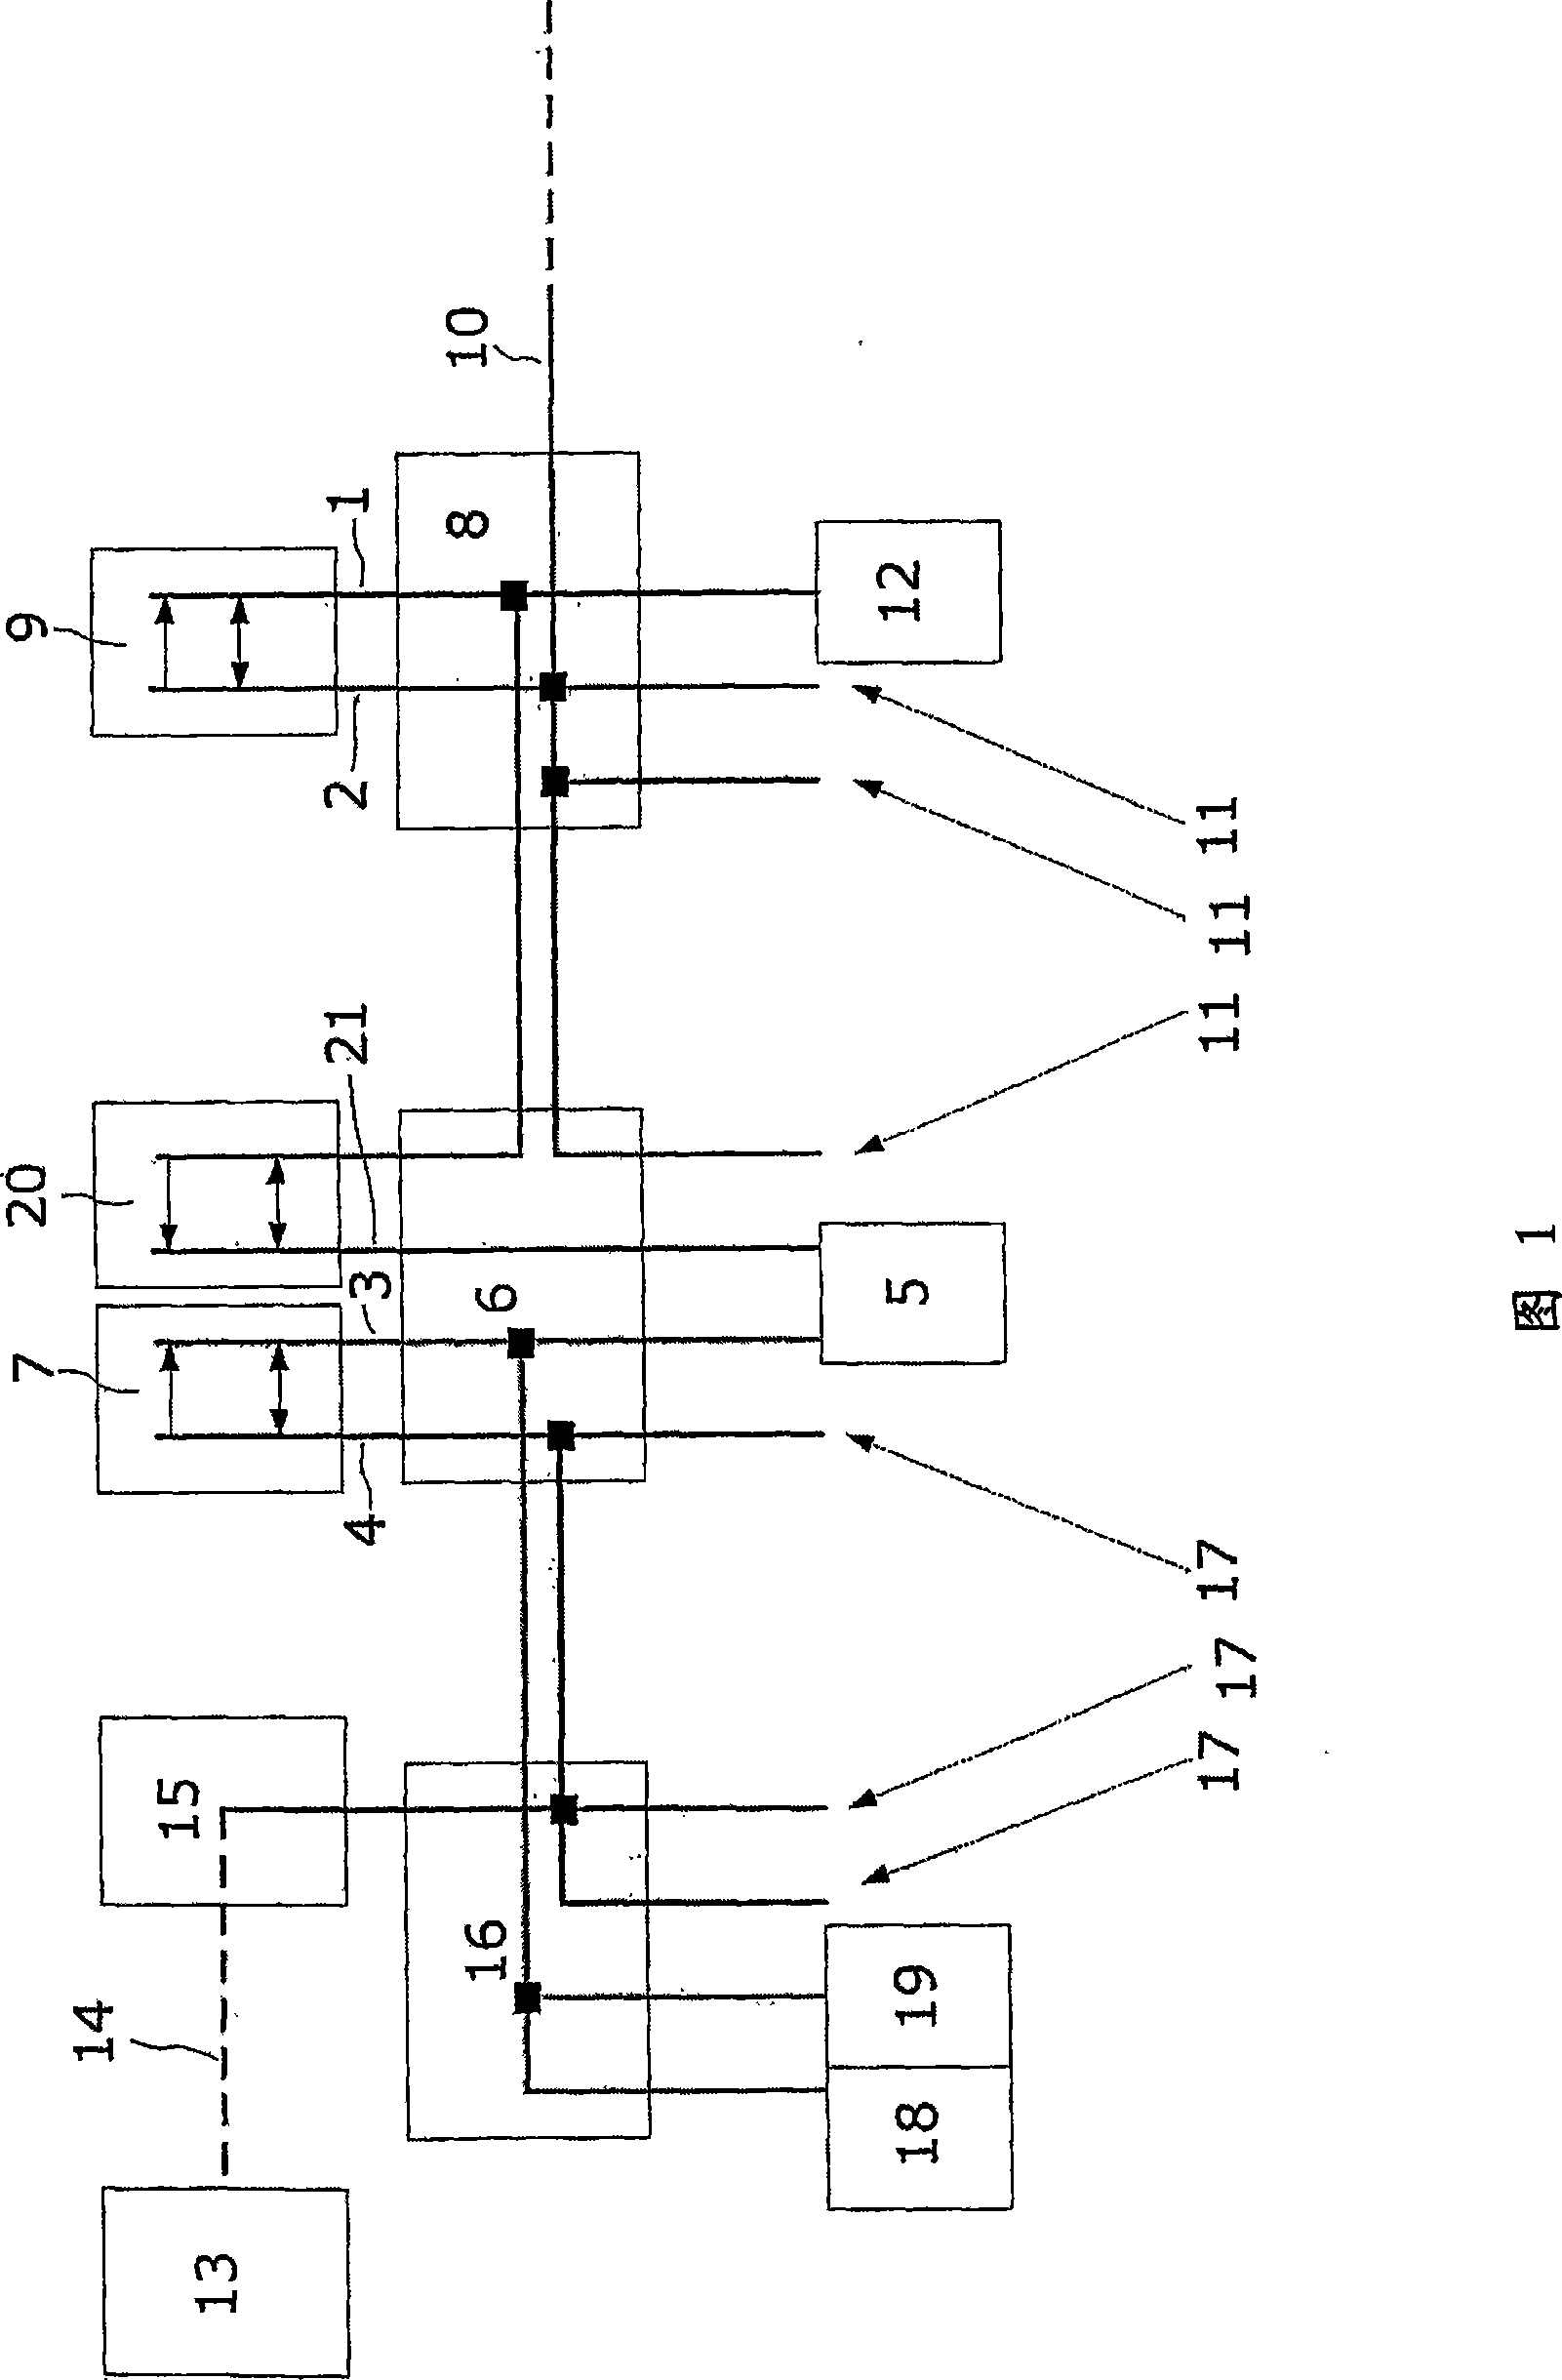 A system for operating a plant